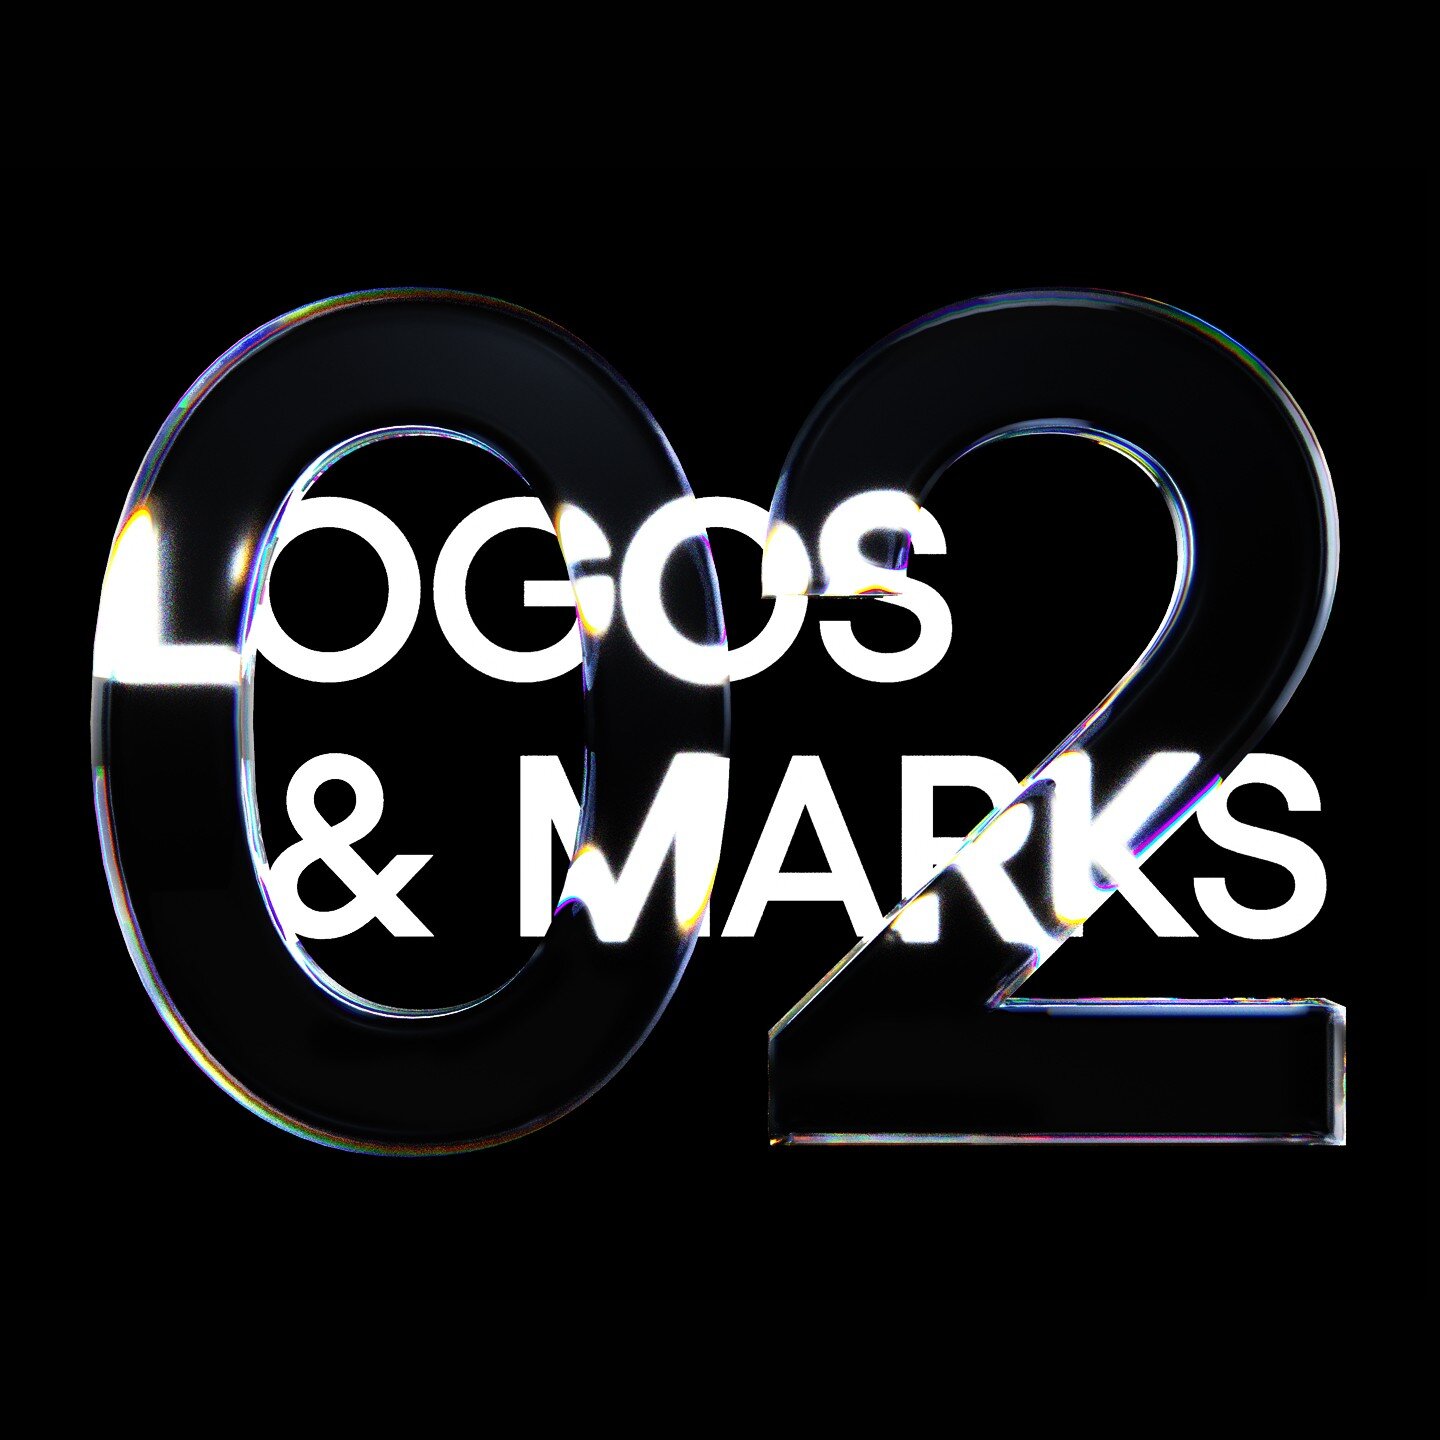 Logos &amp; Marks 02 - released now on Behance.

Need a logo? Get in Contact:
➡️ Direct Message
📩 contact@paulwilson.design

#logo #logomark #logodaily #logoinspire #logodesign #logodesigns #logodesigner #logodesigners #logoinspiration #logoprofessi